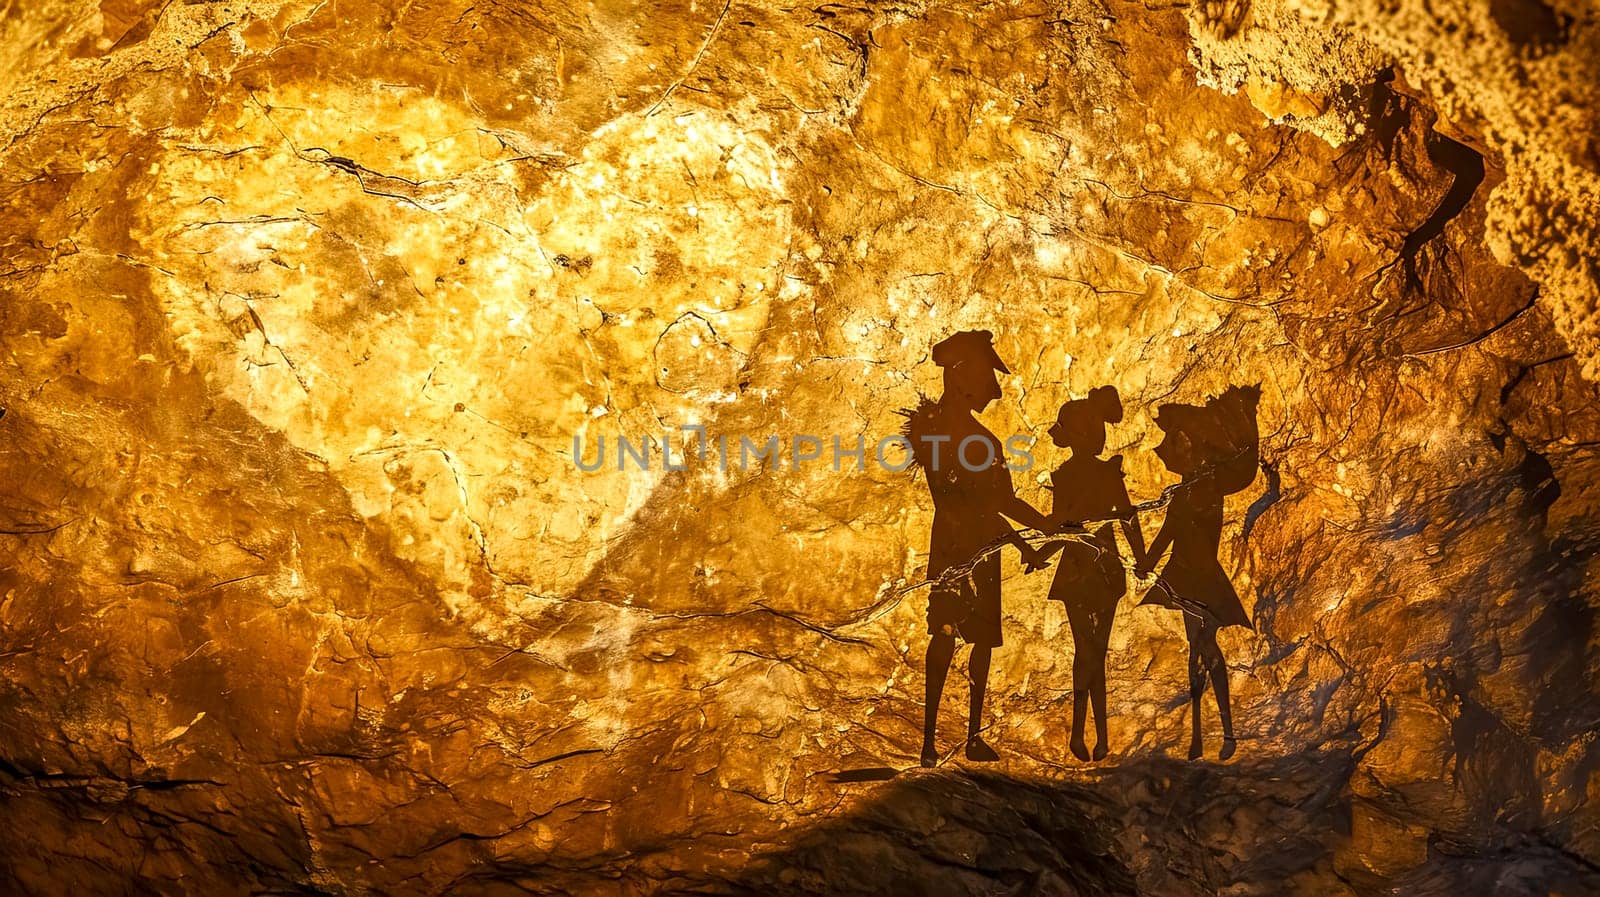 silhouette representation against a golden, textured cave wall, portraying figures in a traditional or ancient setting, possibly depicting a scene from a story or a ritual. by Edophoto